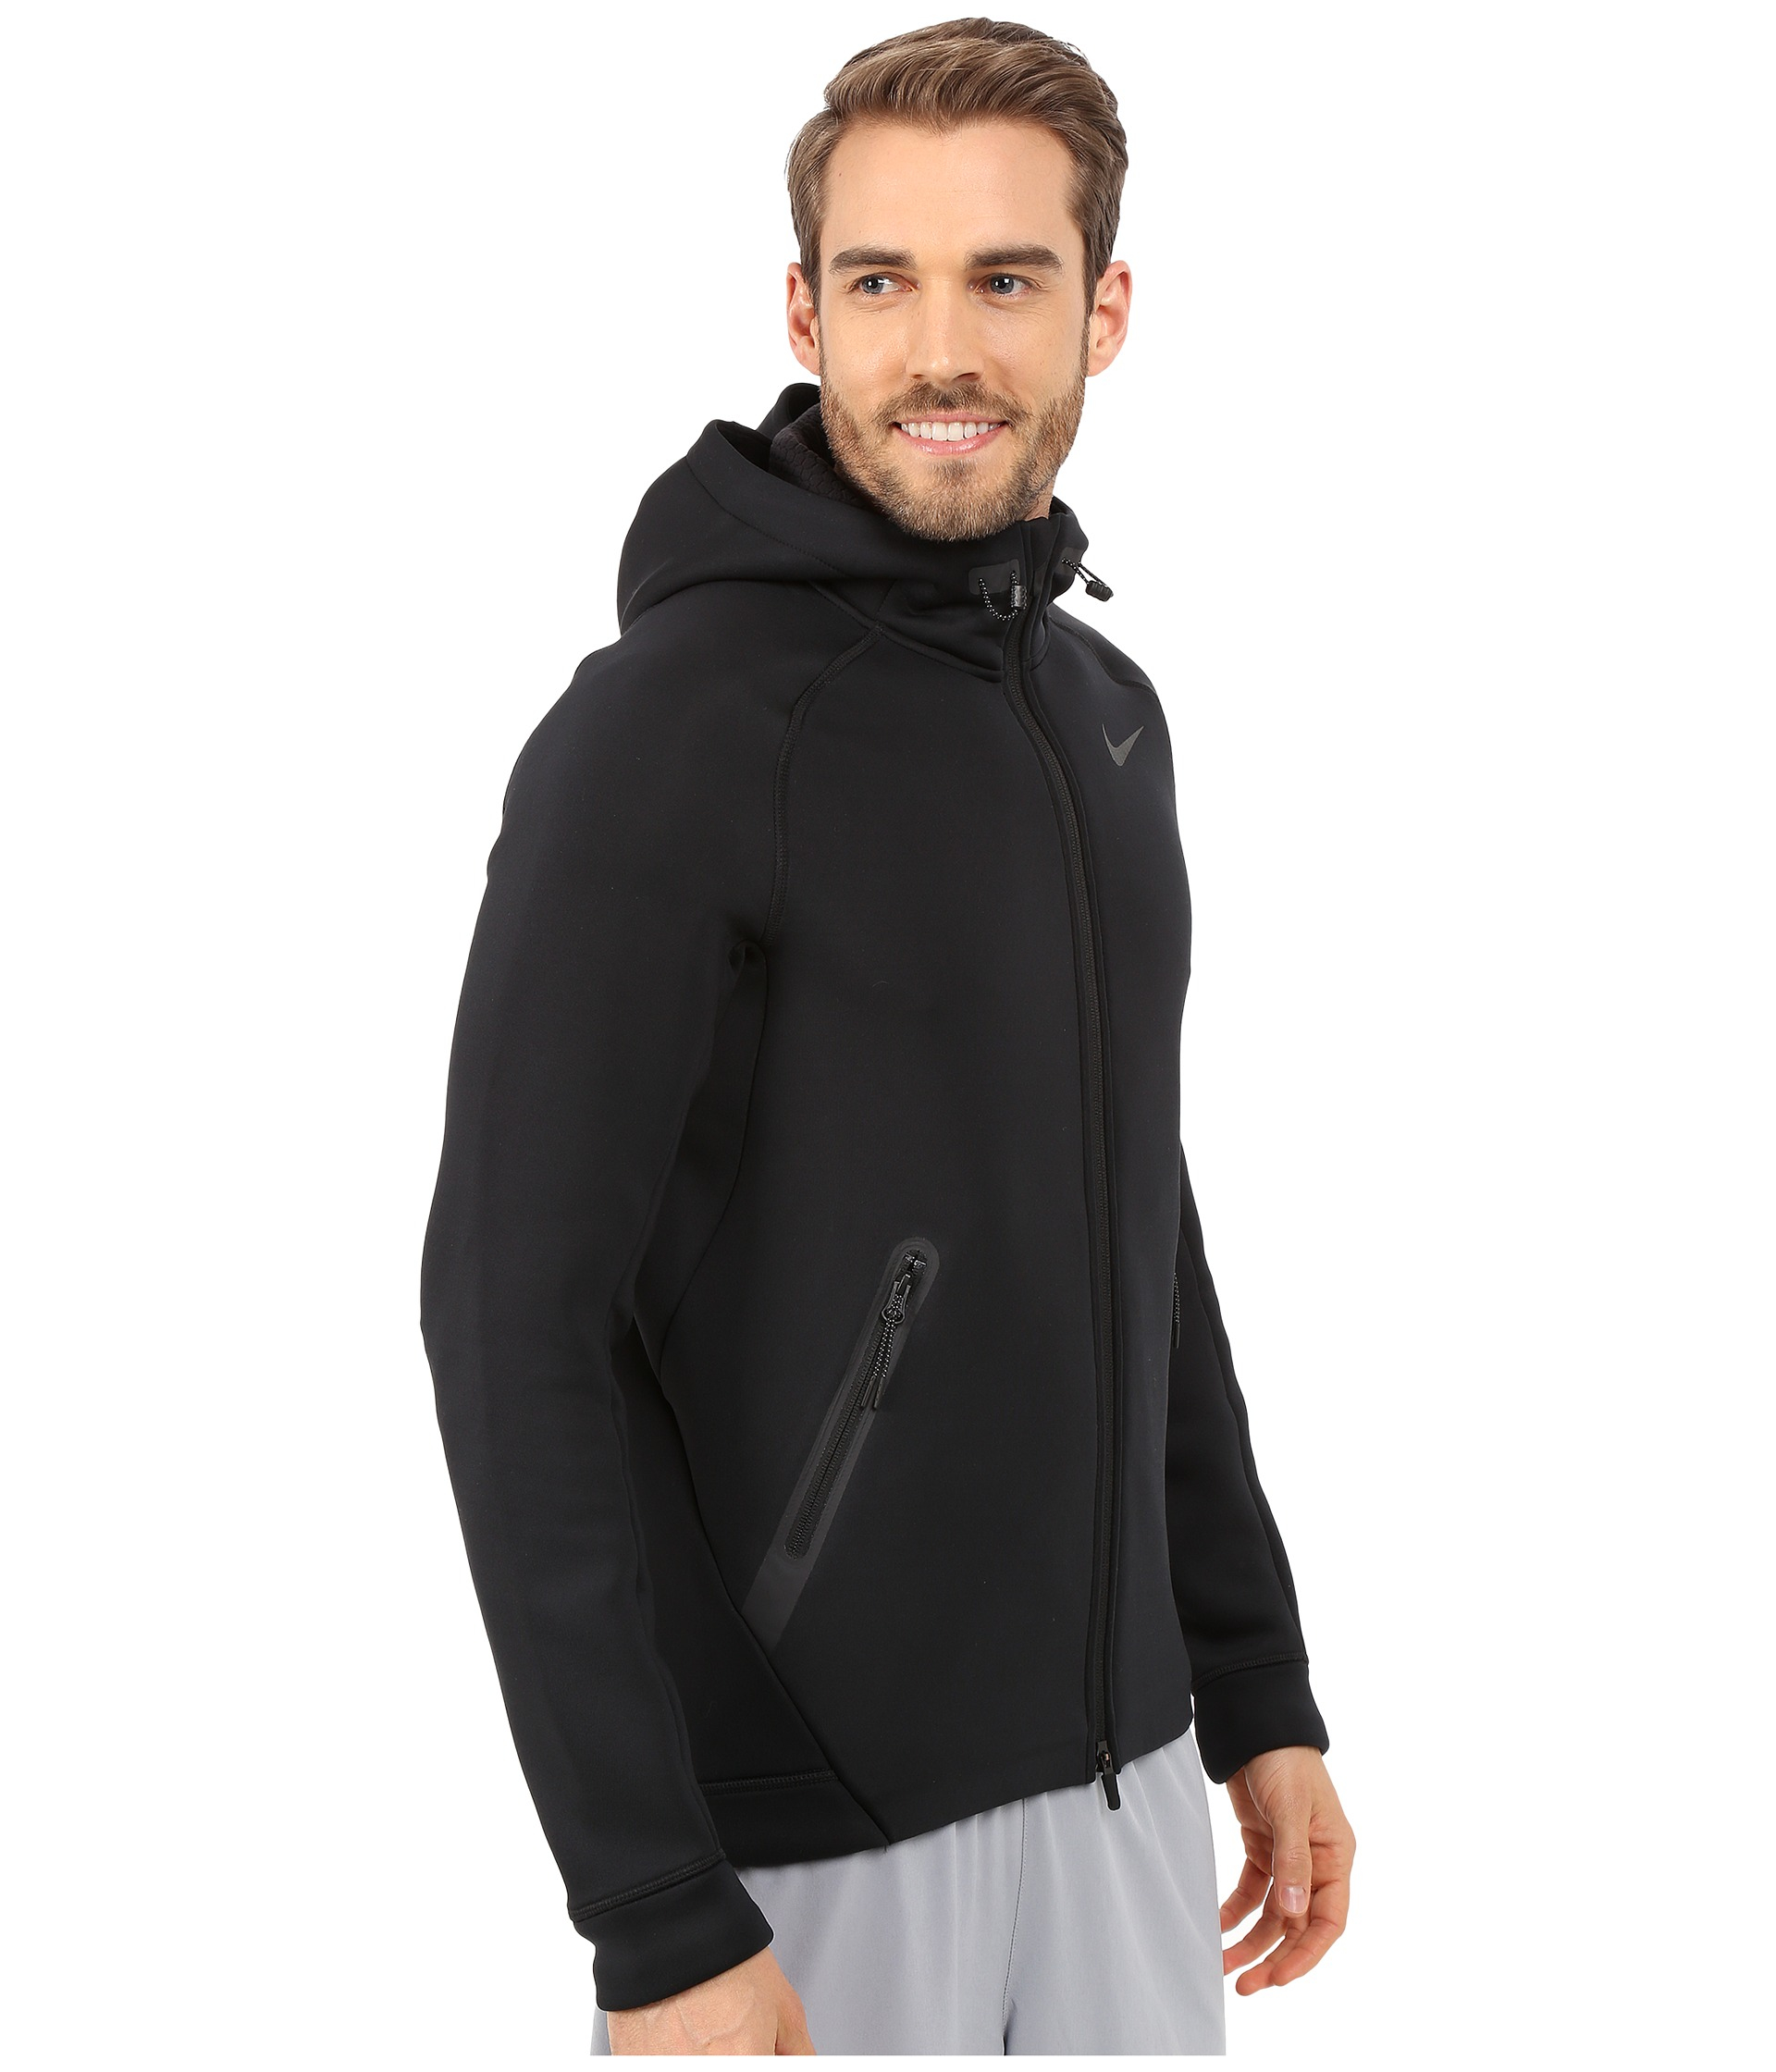 físico yermo identificación Nike Therma-sphere Max Training Jacket in Black for Men | Lyst